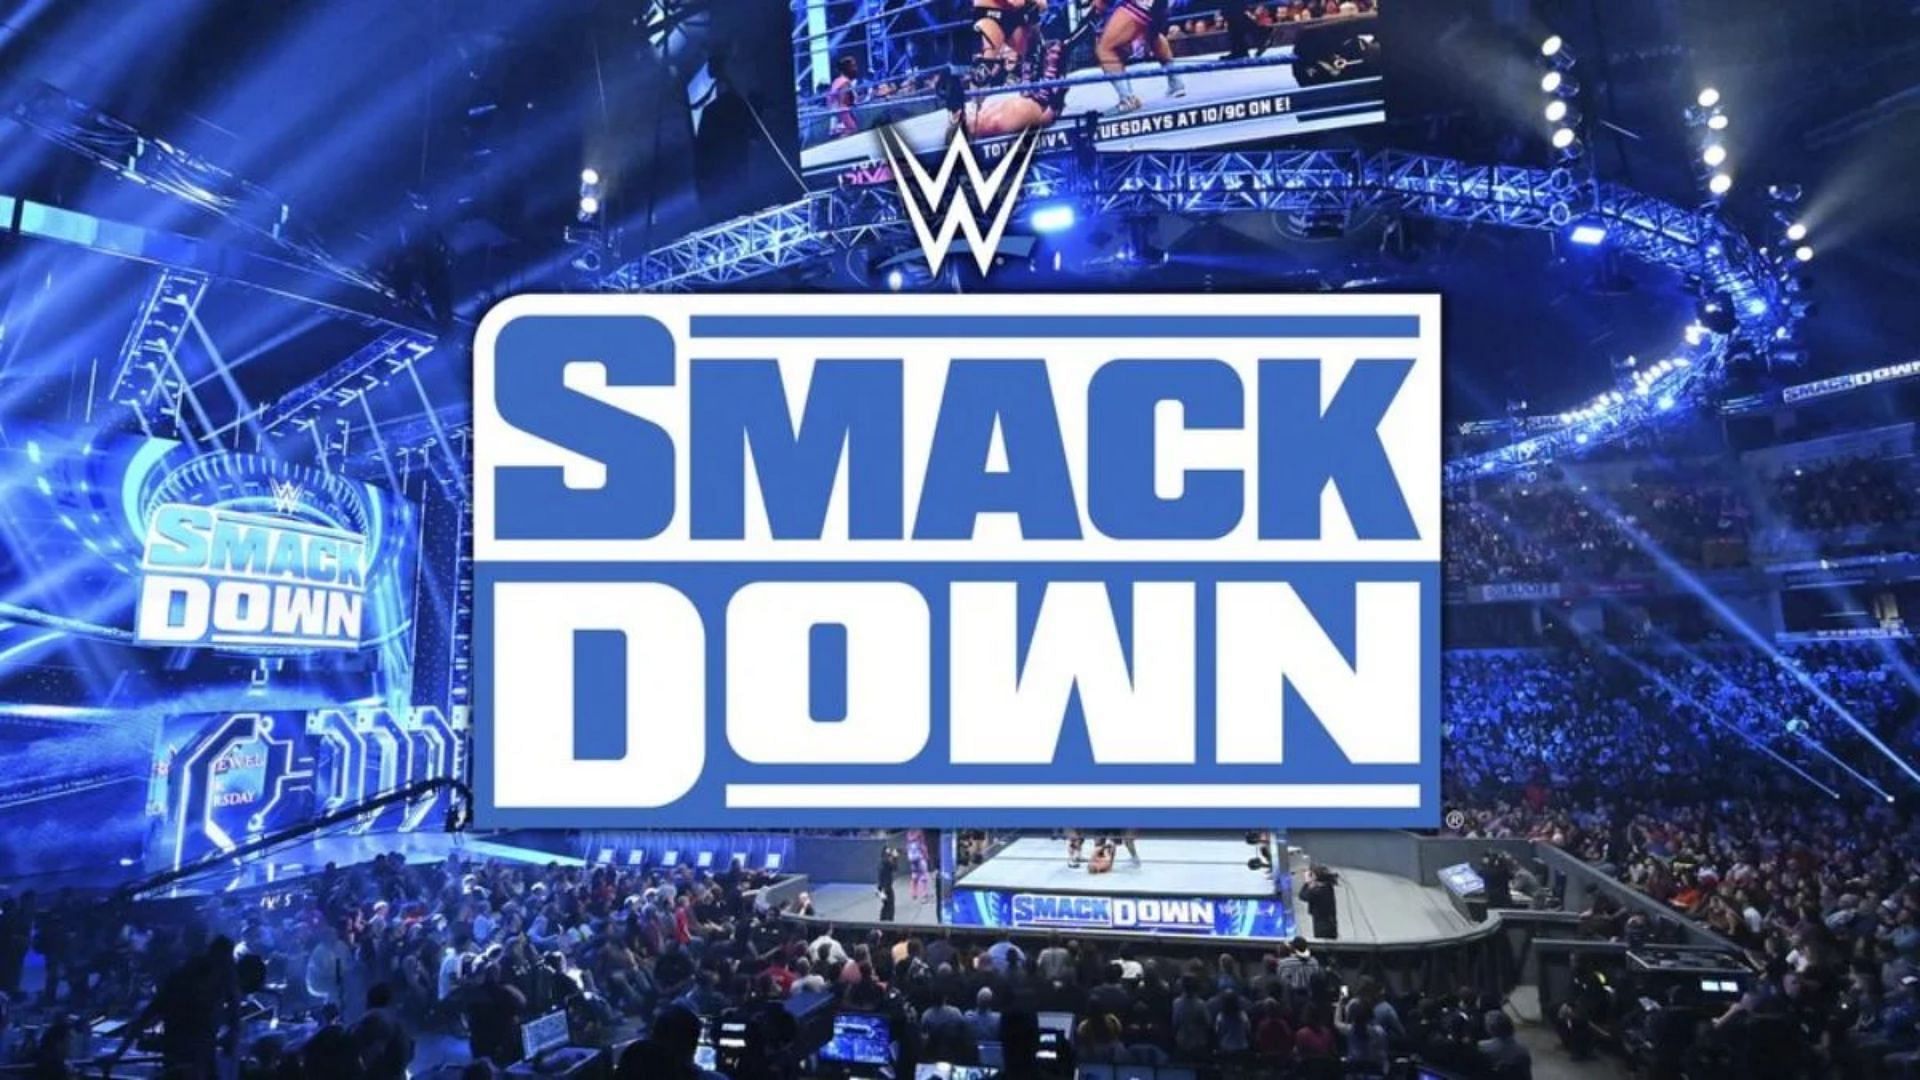 WWE SmackDown was trending this past Friday night!